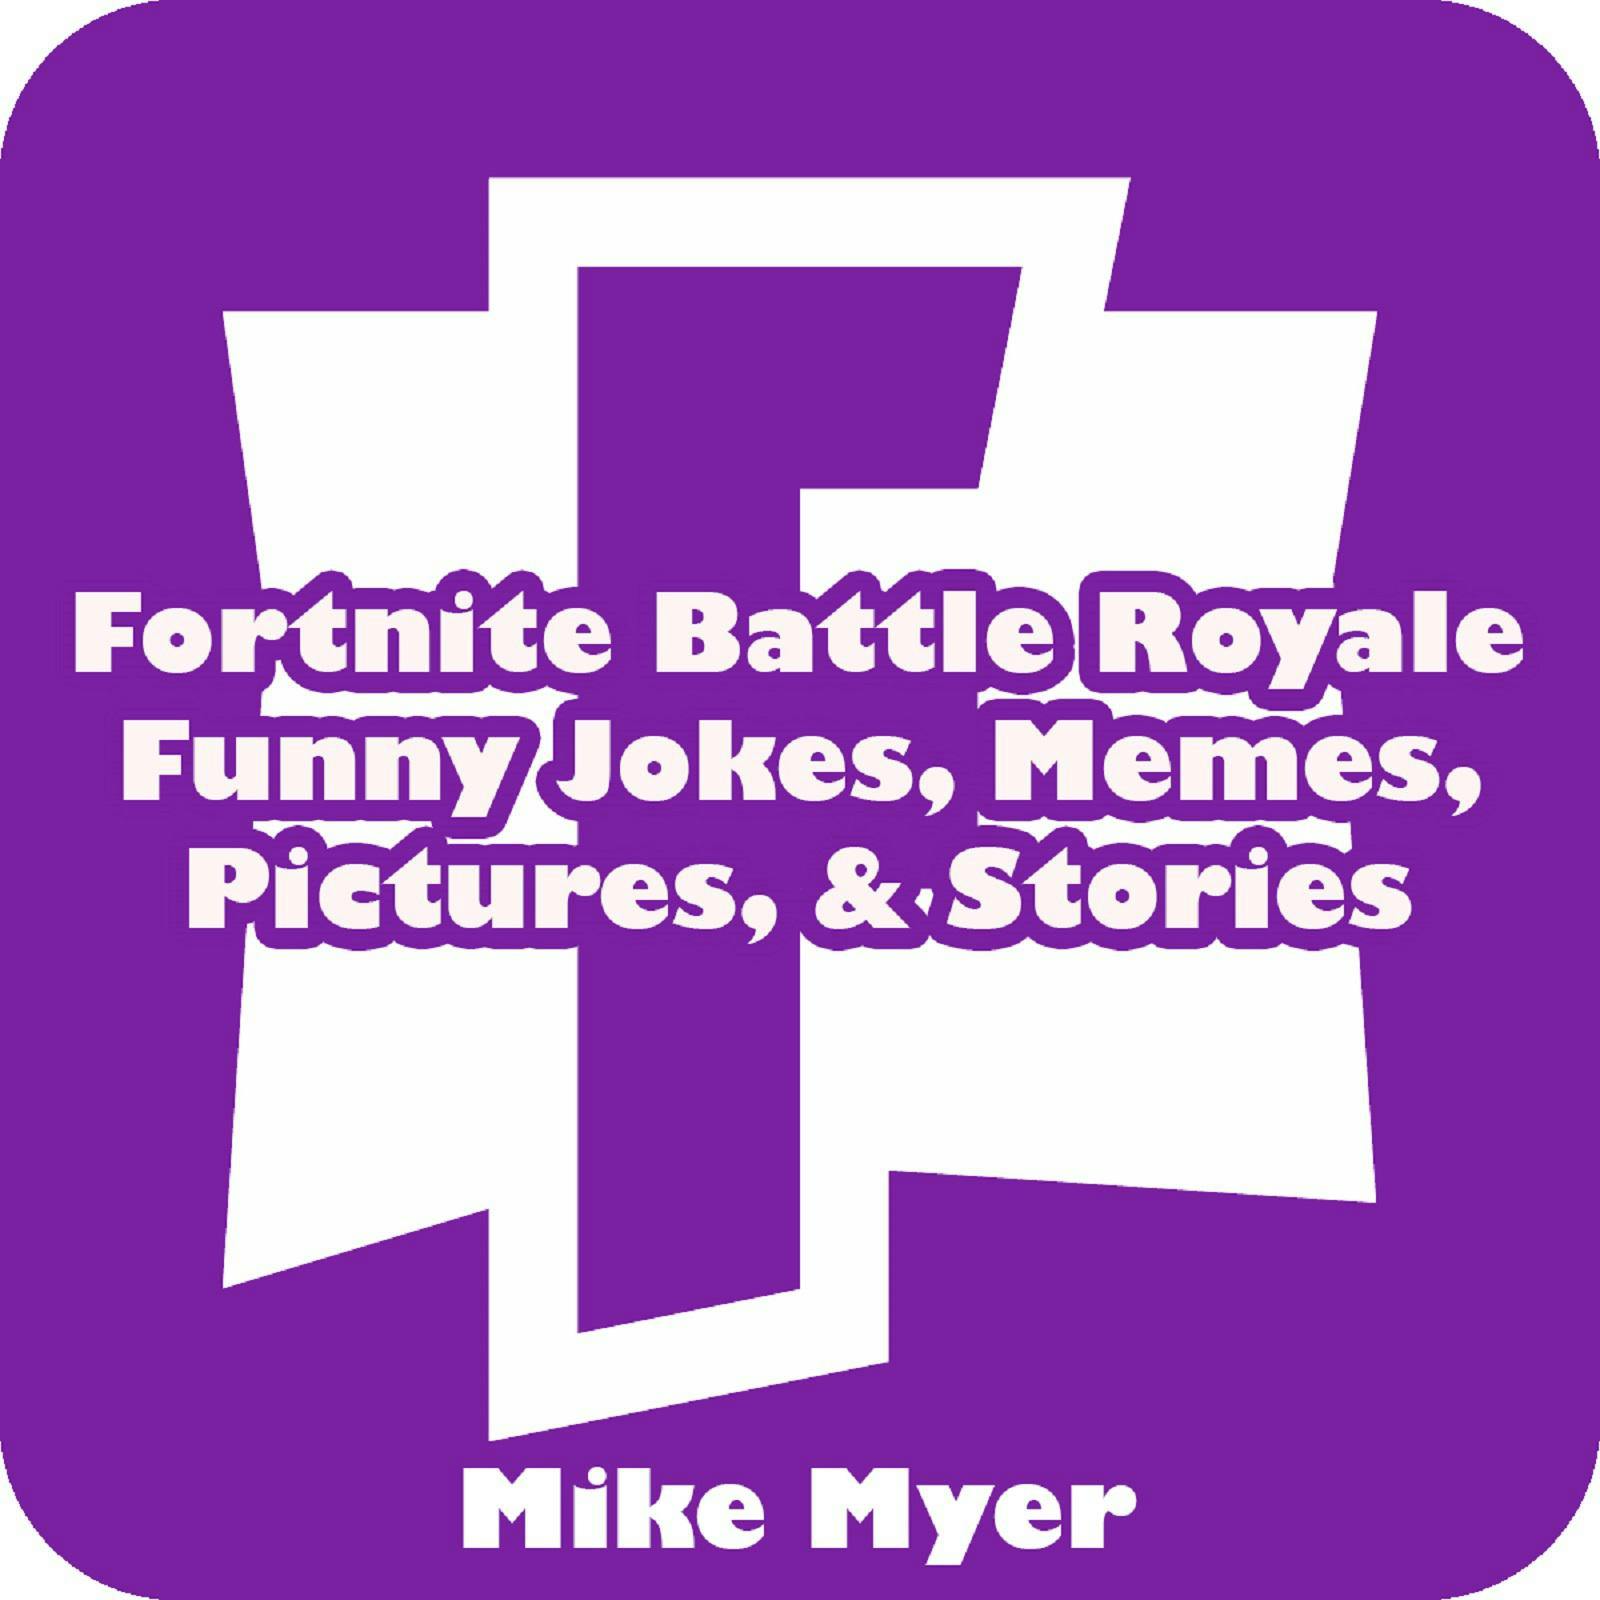 Fortnite Battle Royale Funny Jokes, Memes, Pictures, & Stories - undefined